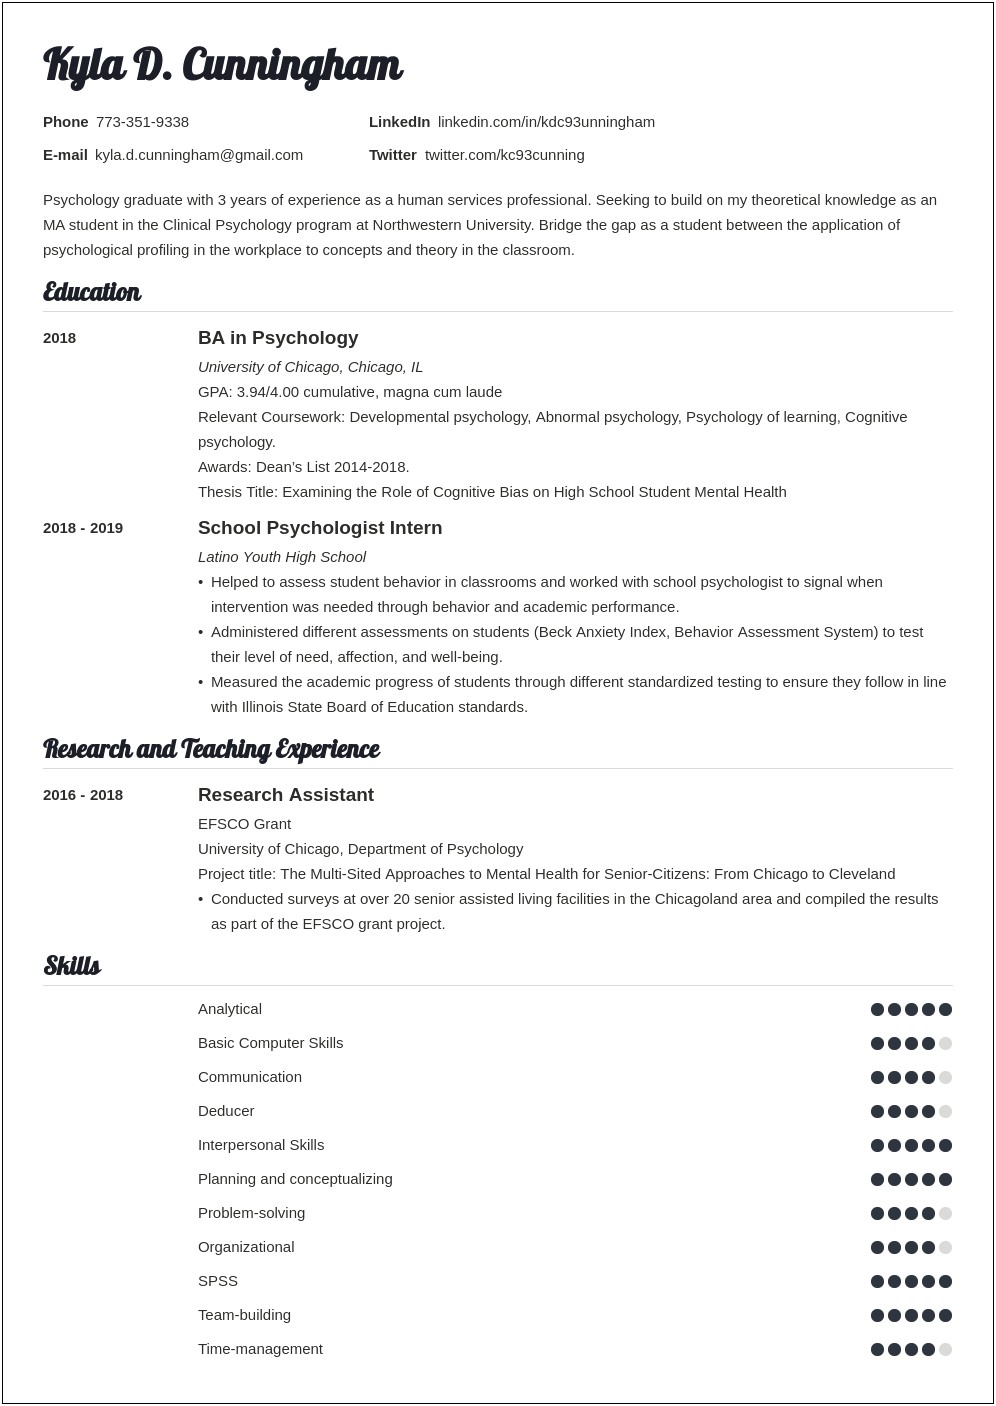 Resume Objective For College Graduate